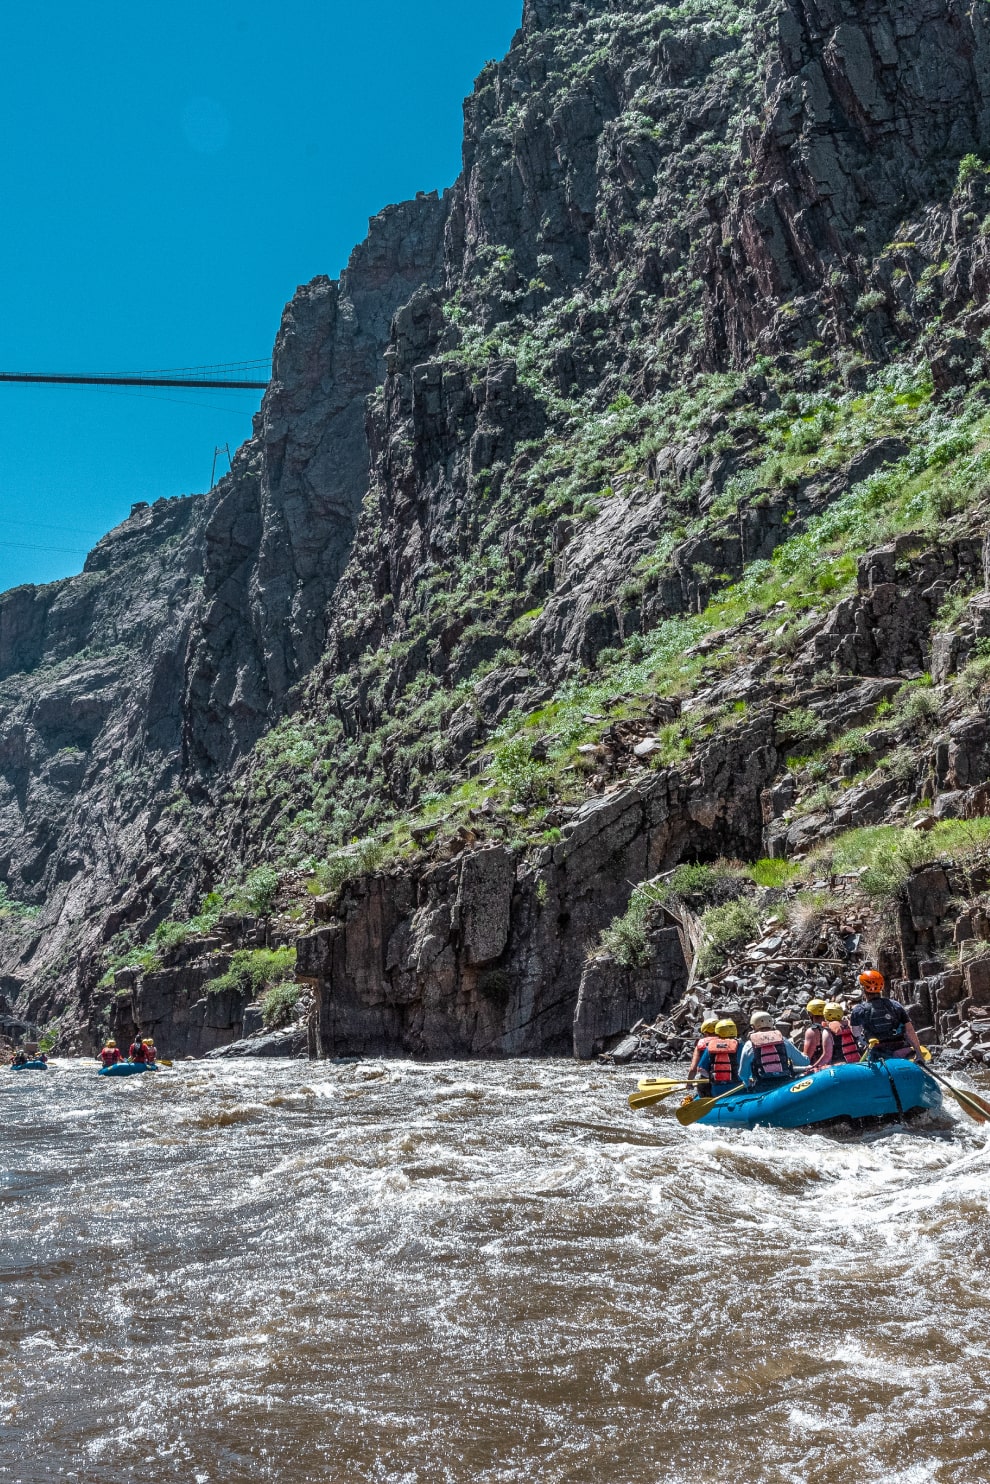 Whitewater rafters on the Royal Gorge